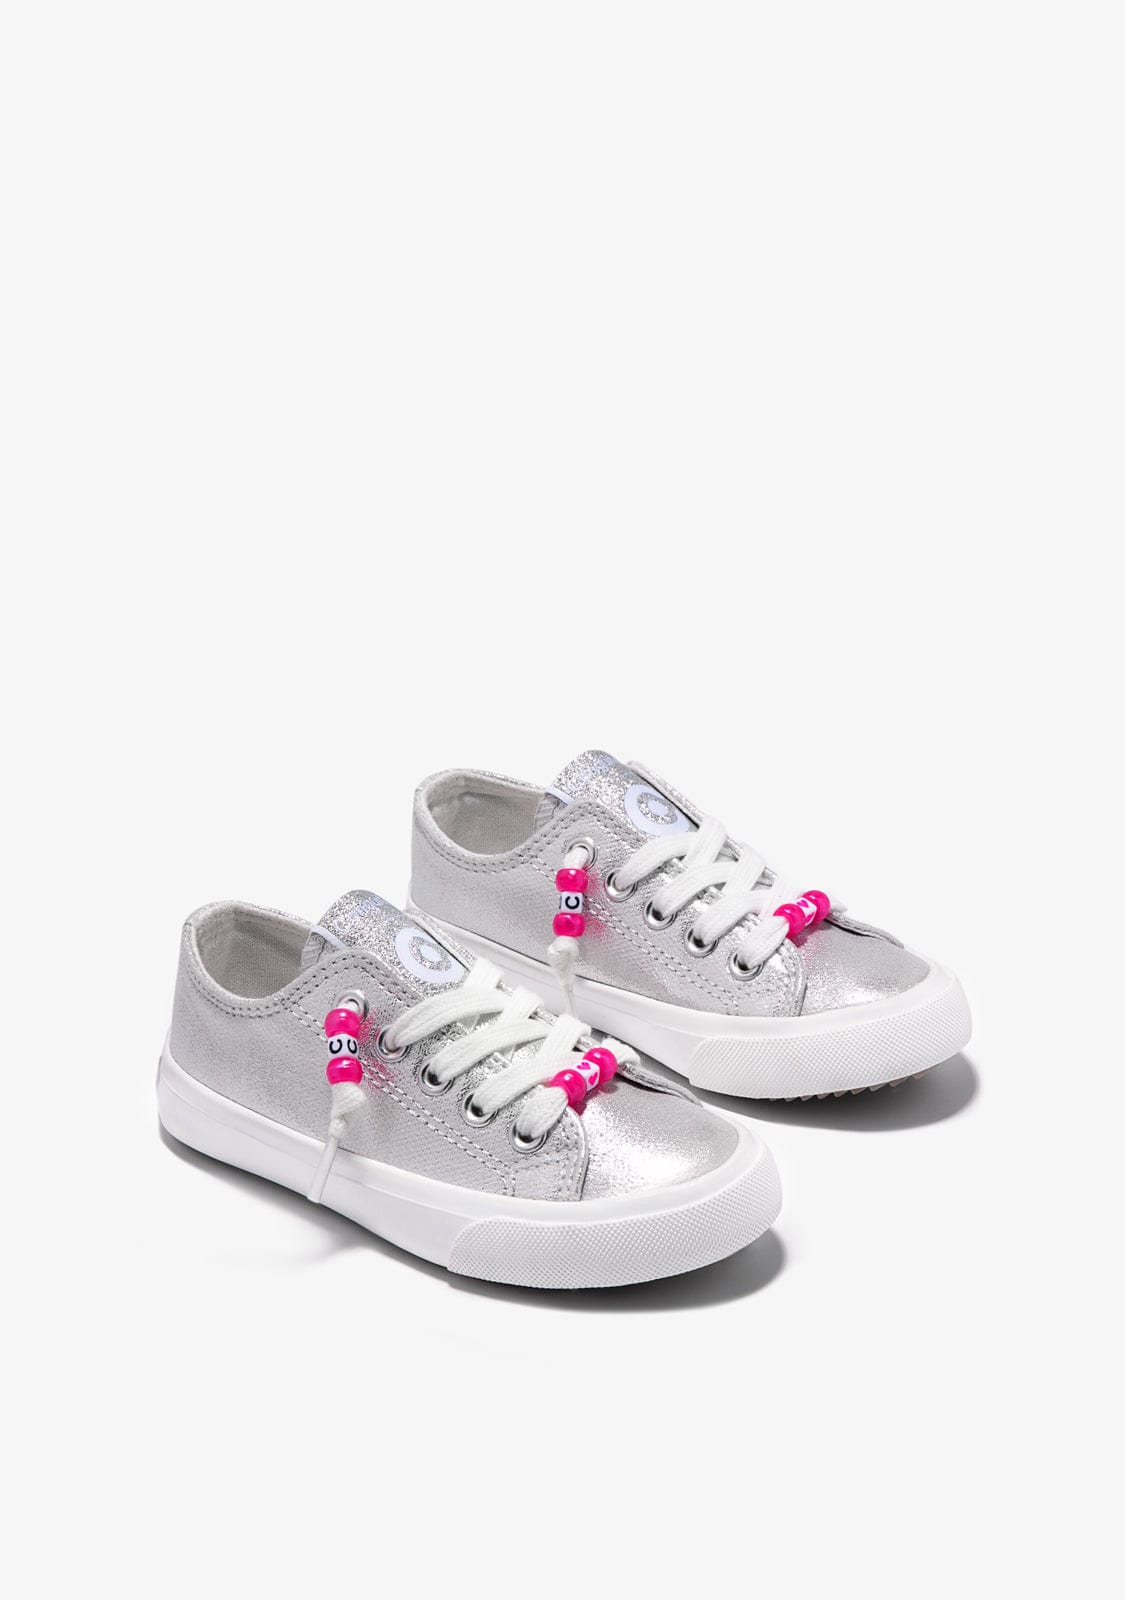 Conguitos BASKET Silver Metallized Sneakers